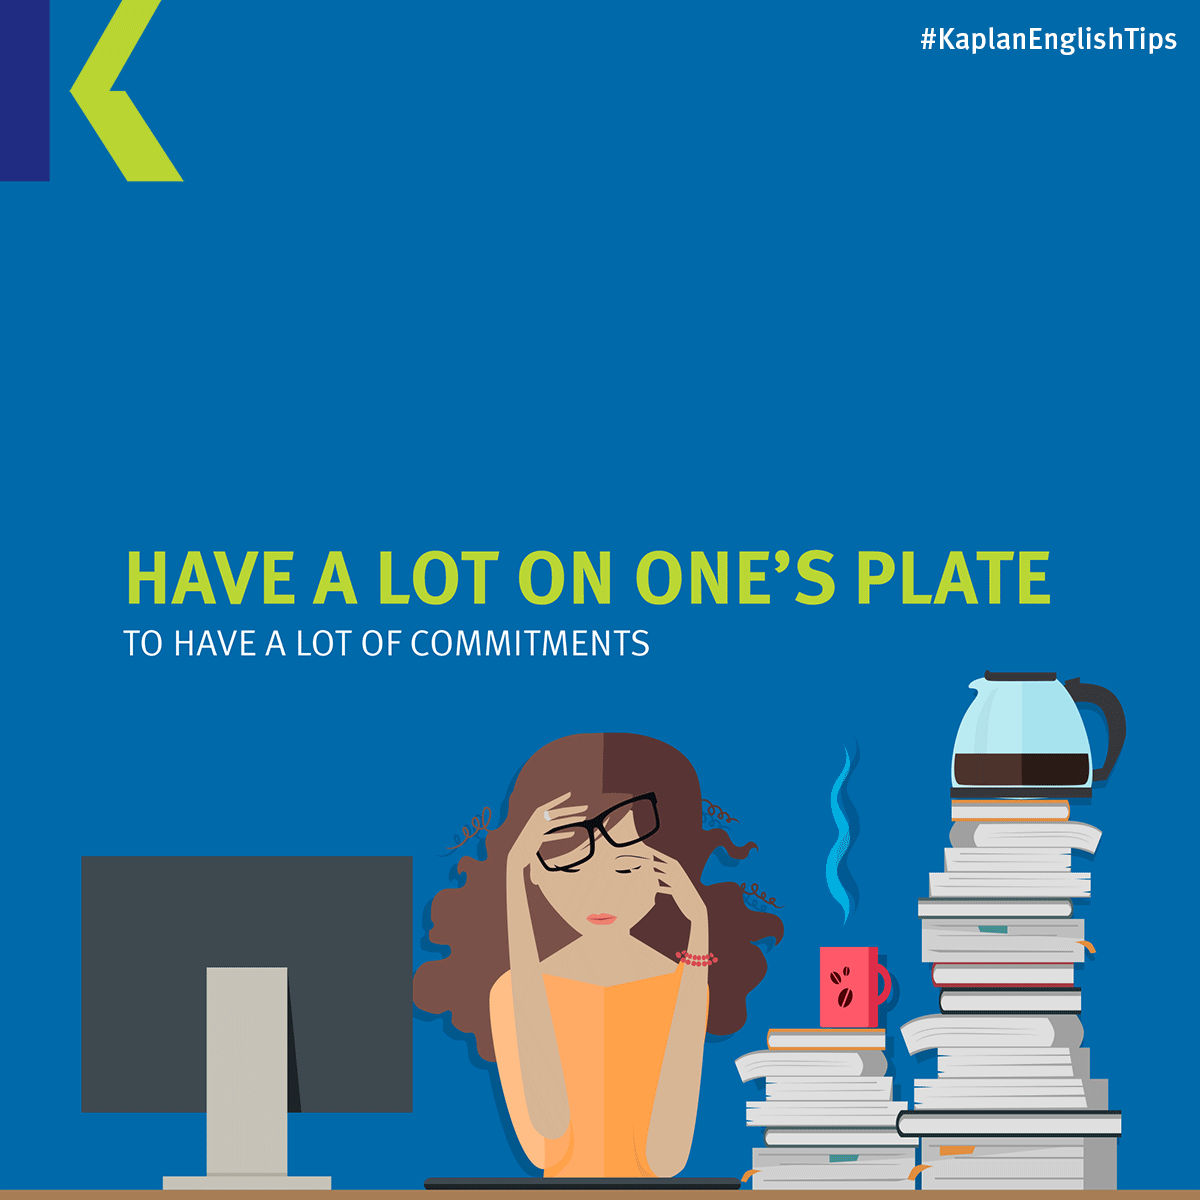 Have a lot on the Plate. A lot on one's Plate. Have a lot on my Plate. Have a lot on one's Plate idiom.